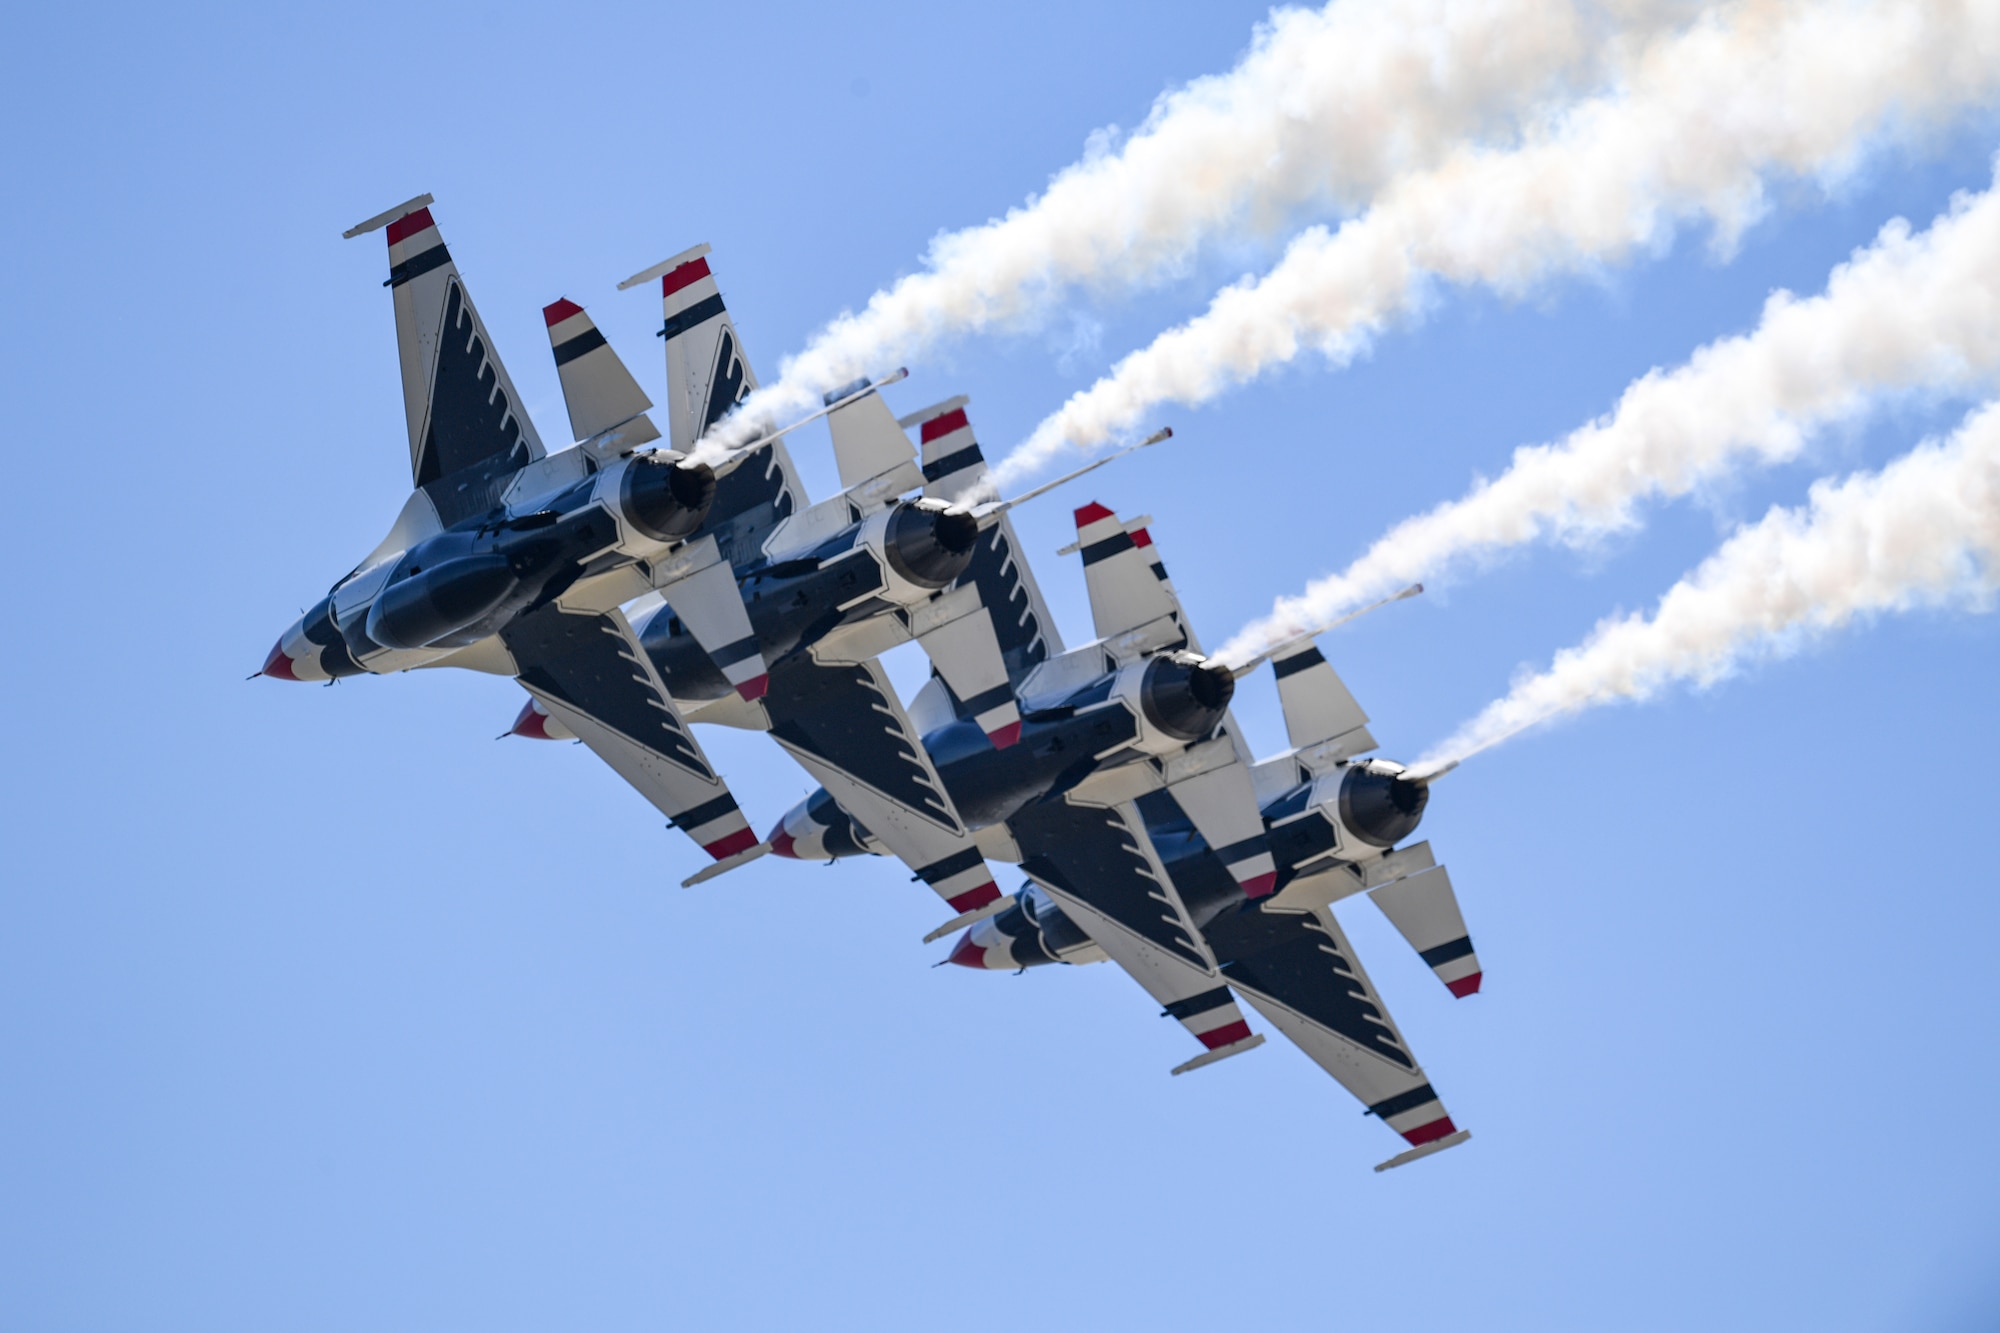 The Thunderbirds perform during a practice session for the 2023 Thunder Over the Sound Air and Space Show at Biloxi Beach in Biloxi, Mississippi, April 28, 2023. Thunder Over the Sound is a unique event where a military installation and its surrounding city jointly host an air show in two locations; Biloxi Beach and Keesler's flightline. (U.S. Air Force photo by Kemberly Groue)